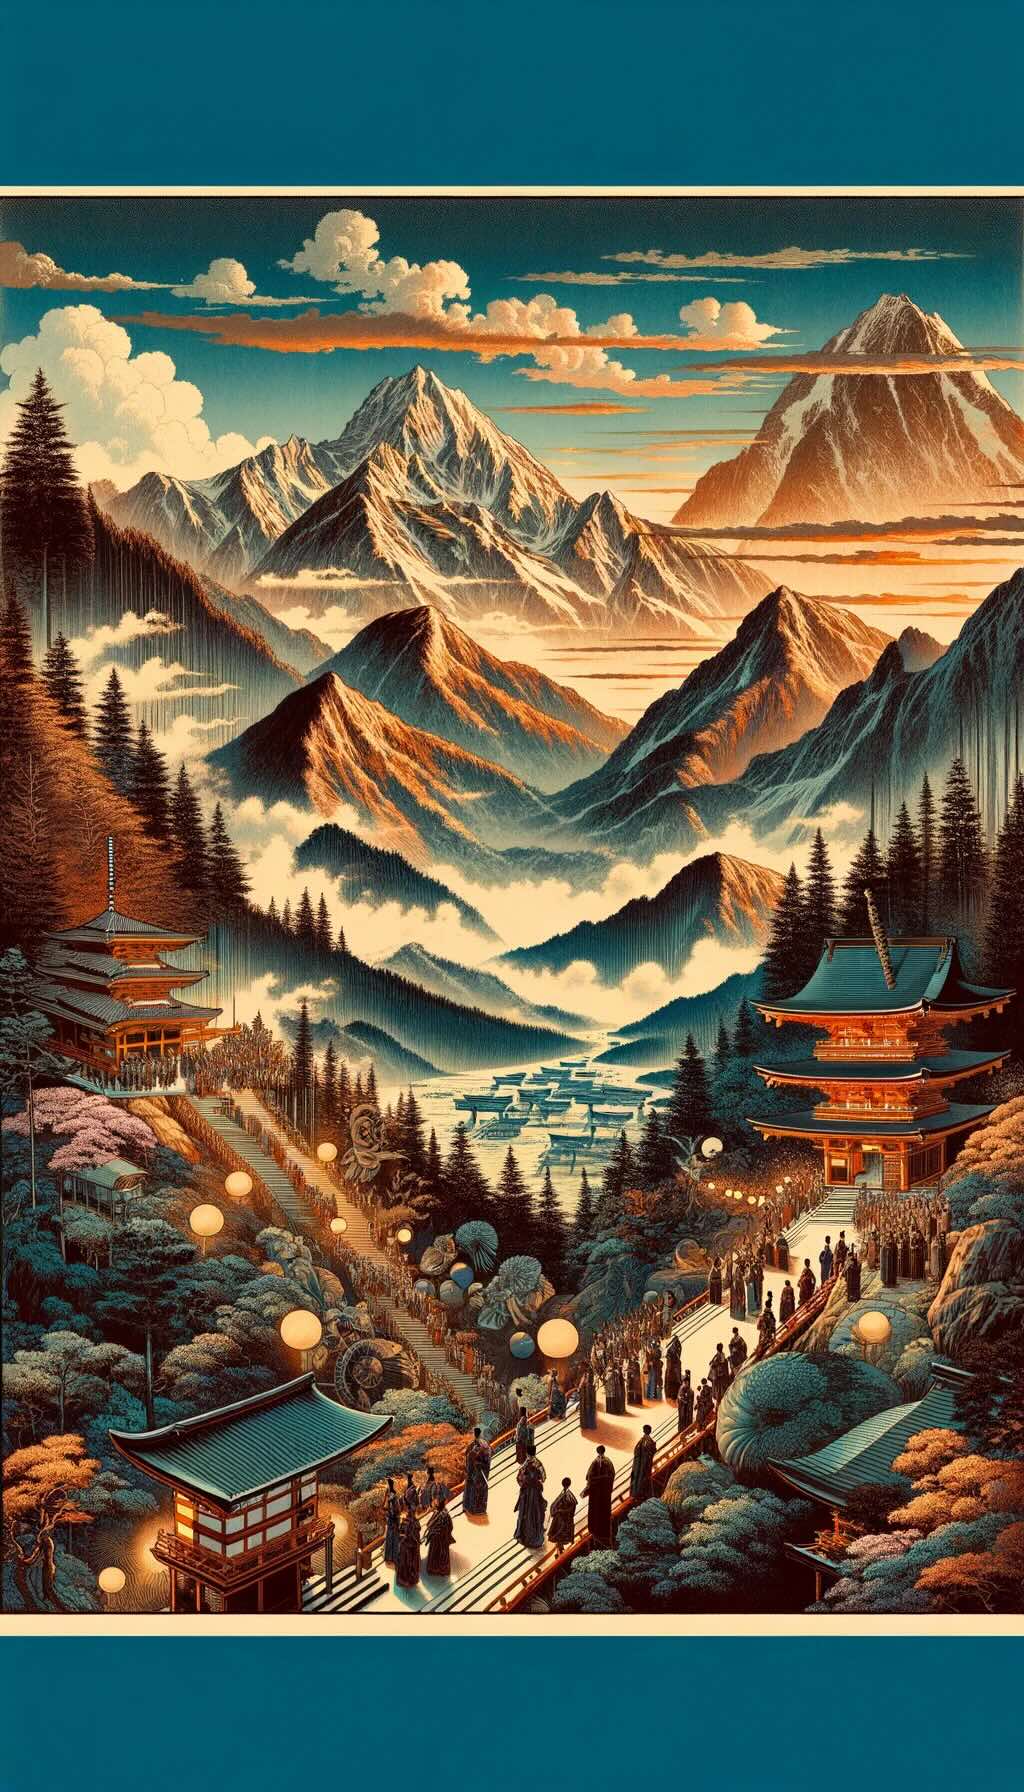 Japan's rich mountainous landscapes, showcases the spiritual, cultural, and natural significance of mountains in Japanese life. It illustrates the ancient pilgrimage routes, like the Kumano Kodo, winding through mystical forests and leading to serene peaks. Ceremonies celebrating "yamabiraki" and the tradition of watching the first sunrise of the New Year from a mountain summit are depicted, highlighting the profound connection between the mountains and Japanese spirituality. The majesty of Japan's mountains is beautifully conveyed, with paths meandering through ancient forests, peaks reaching towards the clouds, and valleys that whisper tales of history. It invites viewers to explore the deep spirituality and breathtaking beauty of Japan's legendary mountains, emphasizing their pivotal role in the tapestry of rural Japan.